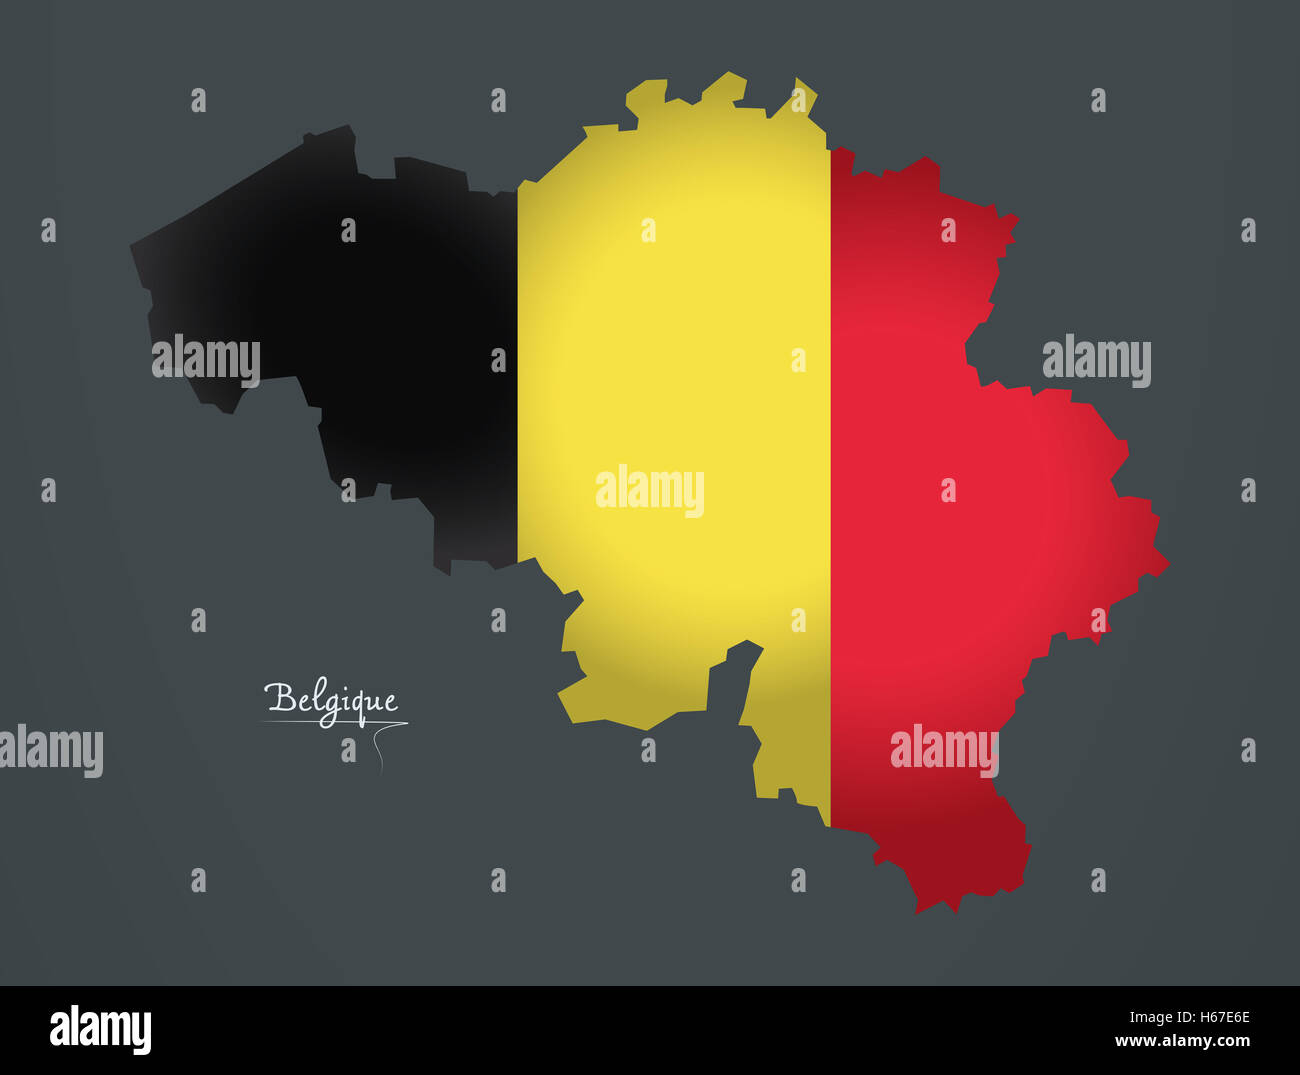 Belgium map special artwork style with flag illustration Stock Photo